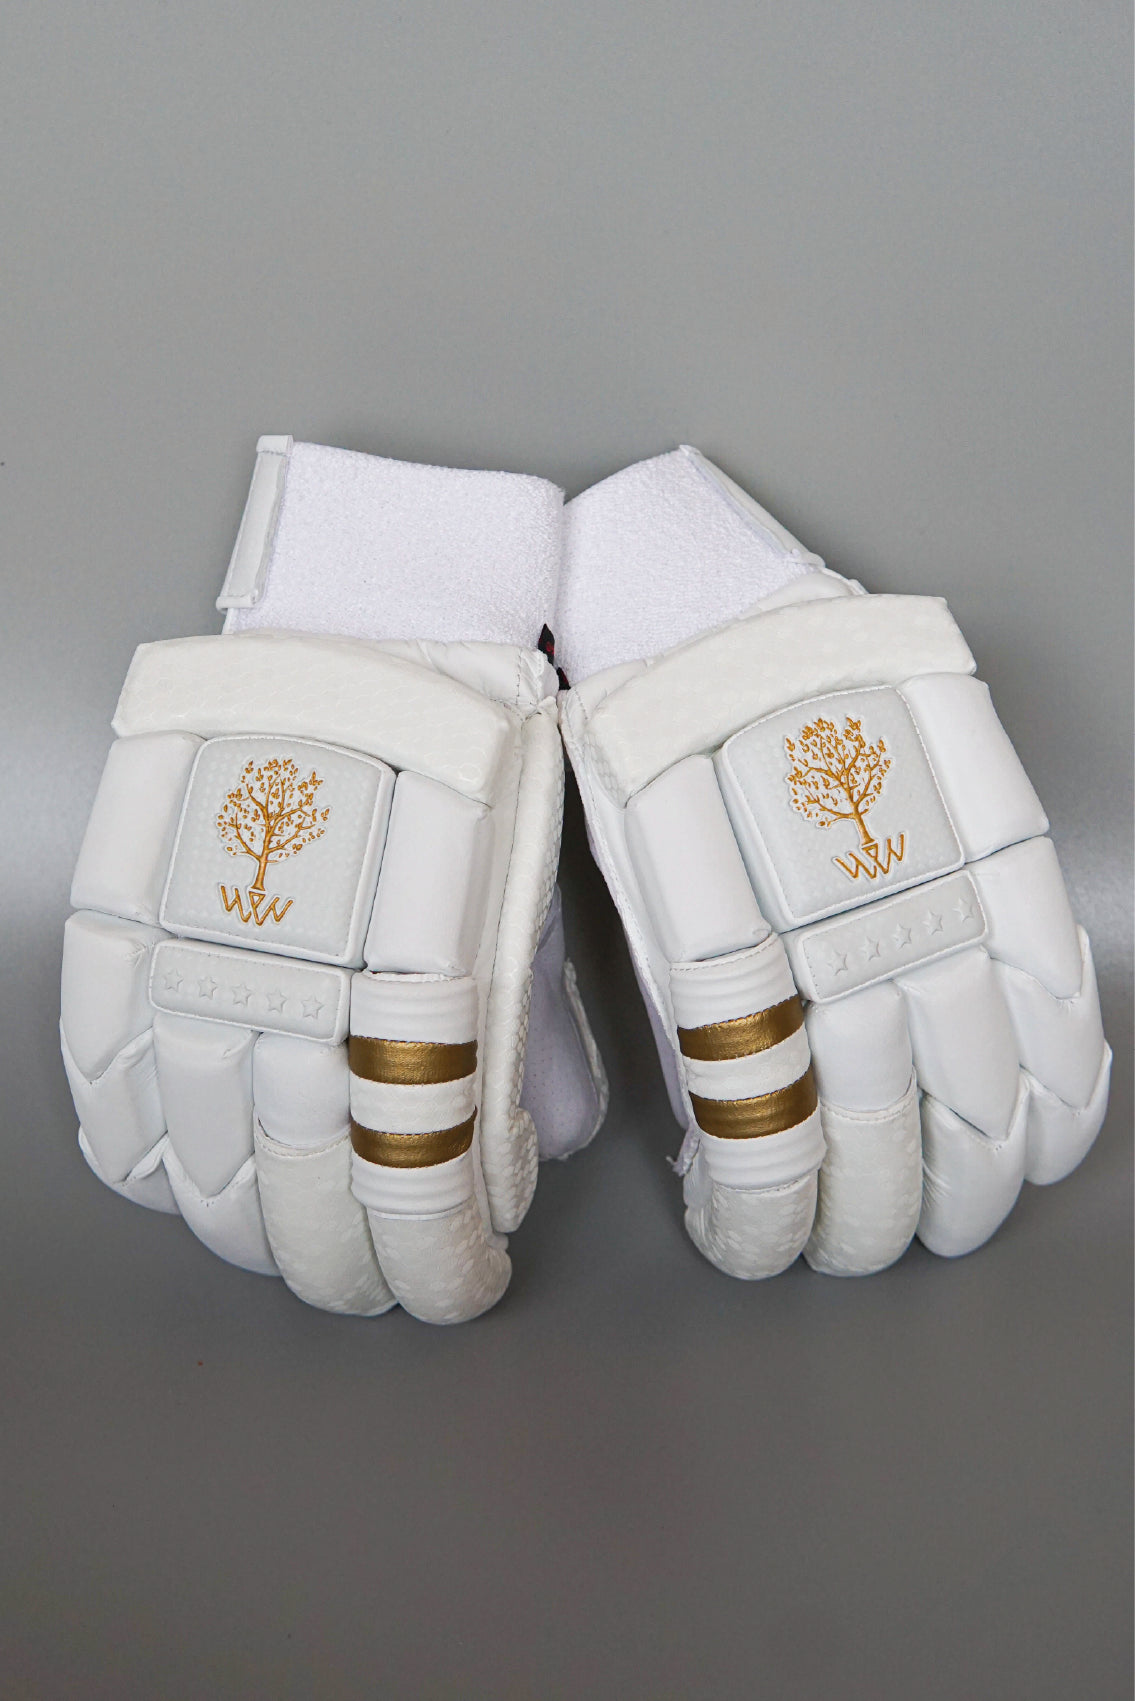 with Willow Twin cricket batting gloves featuring Willow Twin triple stripe